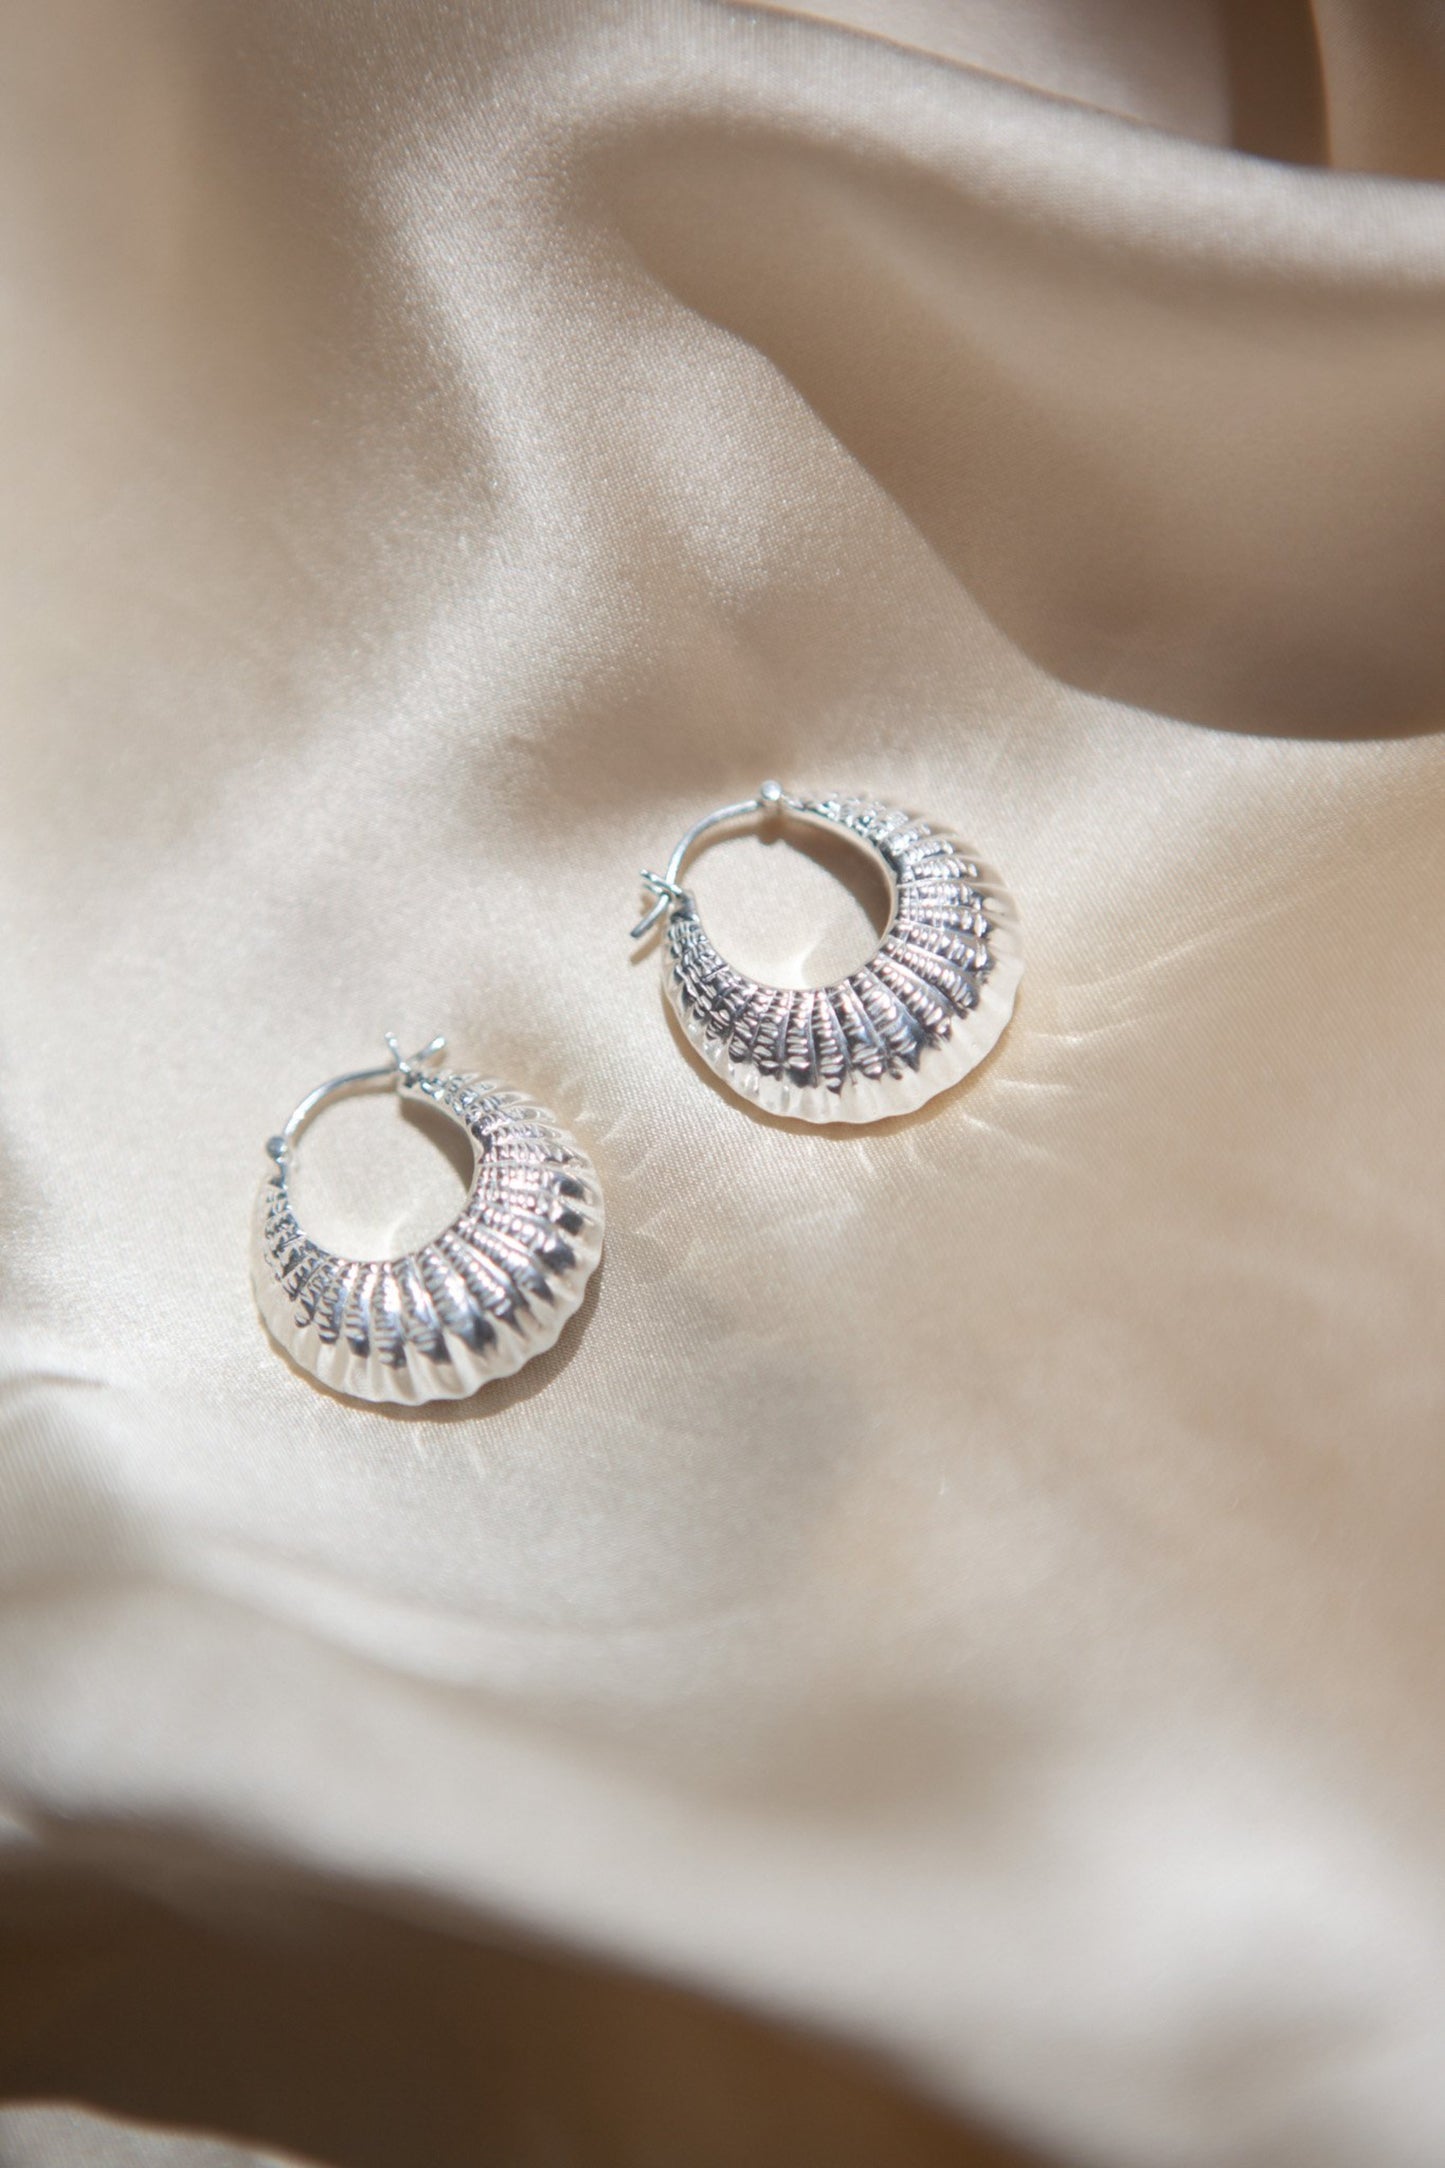 The French Shell Earrings